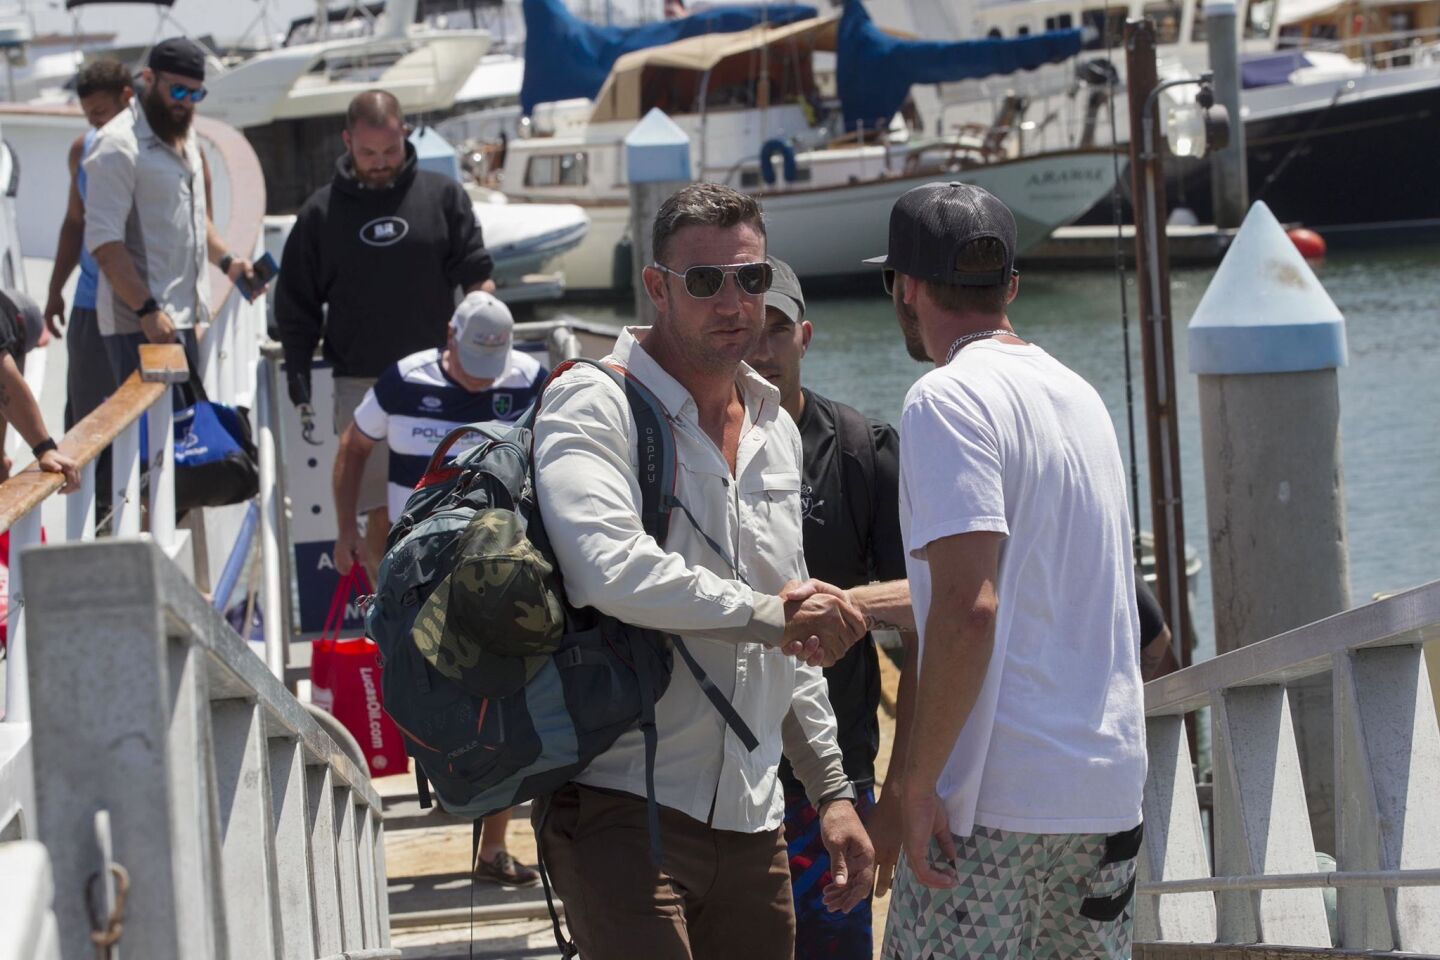 SAN DIECongressman Duncan D. Hunter, left, who was indicted yesterday on campaign finance violations says he is going to fight Òpolitically motivatedÓ charges against him after returning from a Rivers of Recovery Fishing Tournament for Wounded Combat Veterans fundraiser in San Diego. He stopped to shake hands with a man as he left the boat to a waiting media throng.